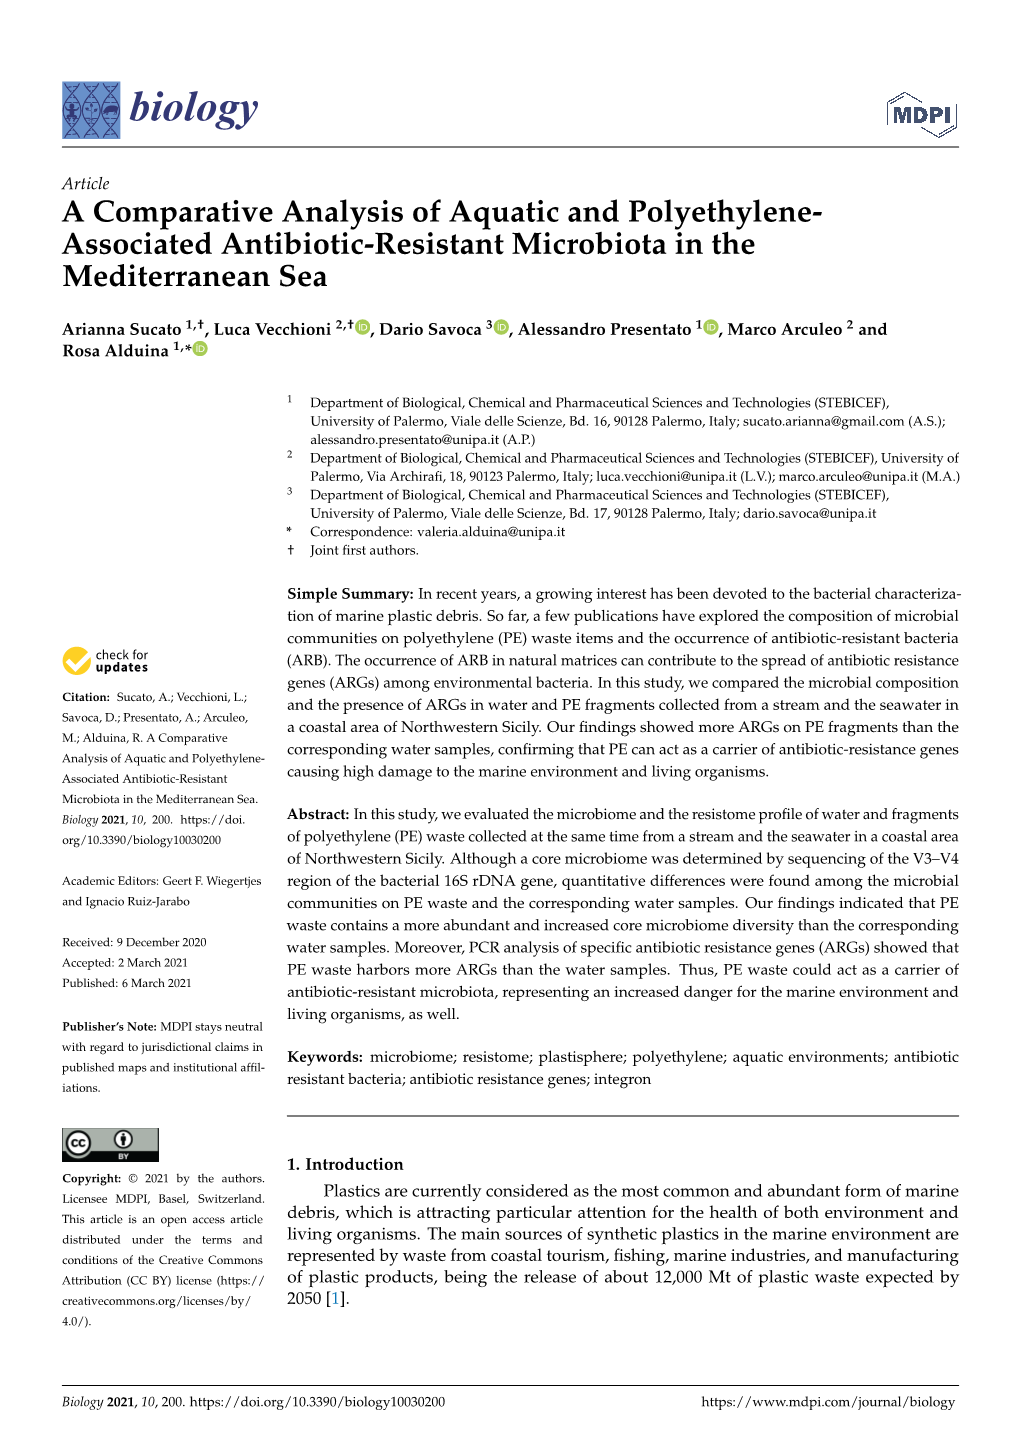 A Comparative Analysis of Aquatic and Polyethylene- Associated Antibiotic-Resistant Microbiota in the Mediterranean Sea